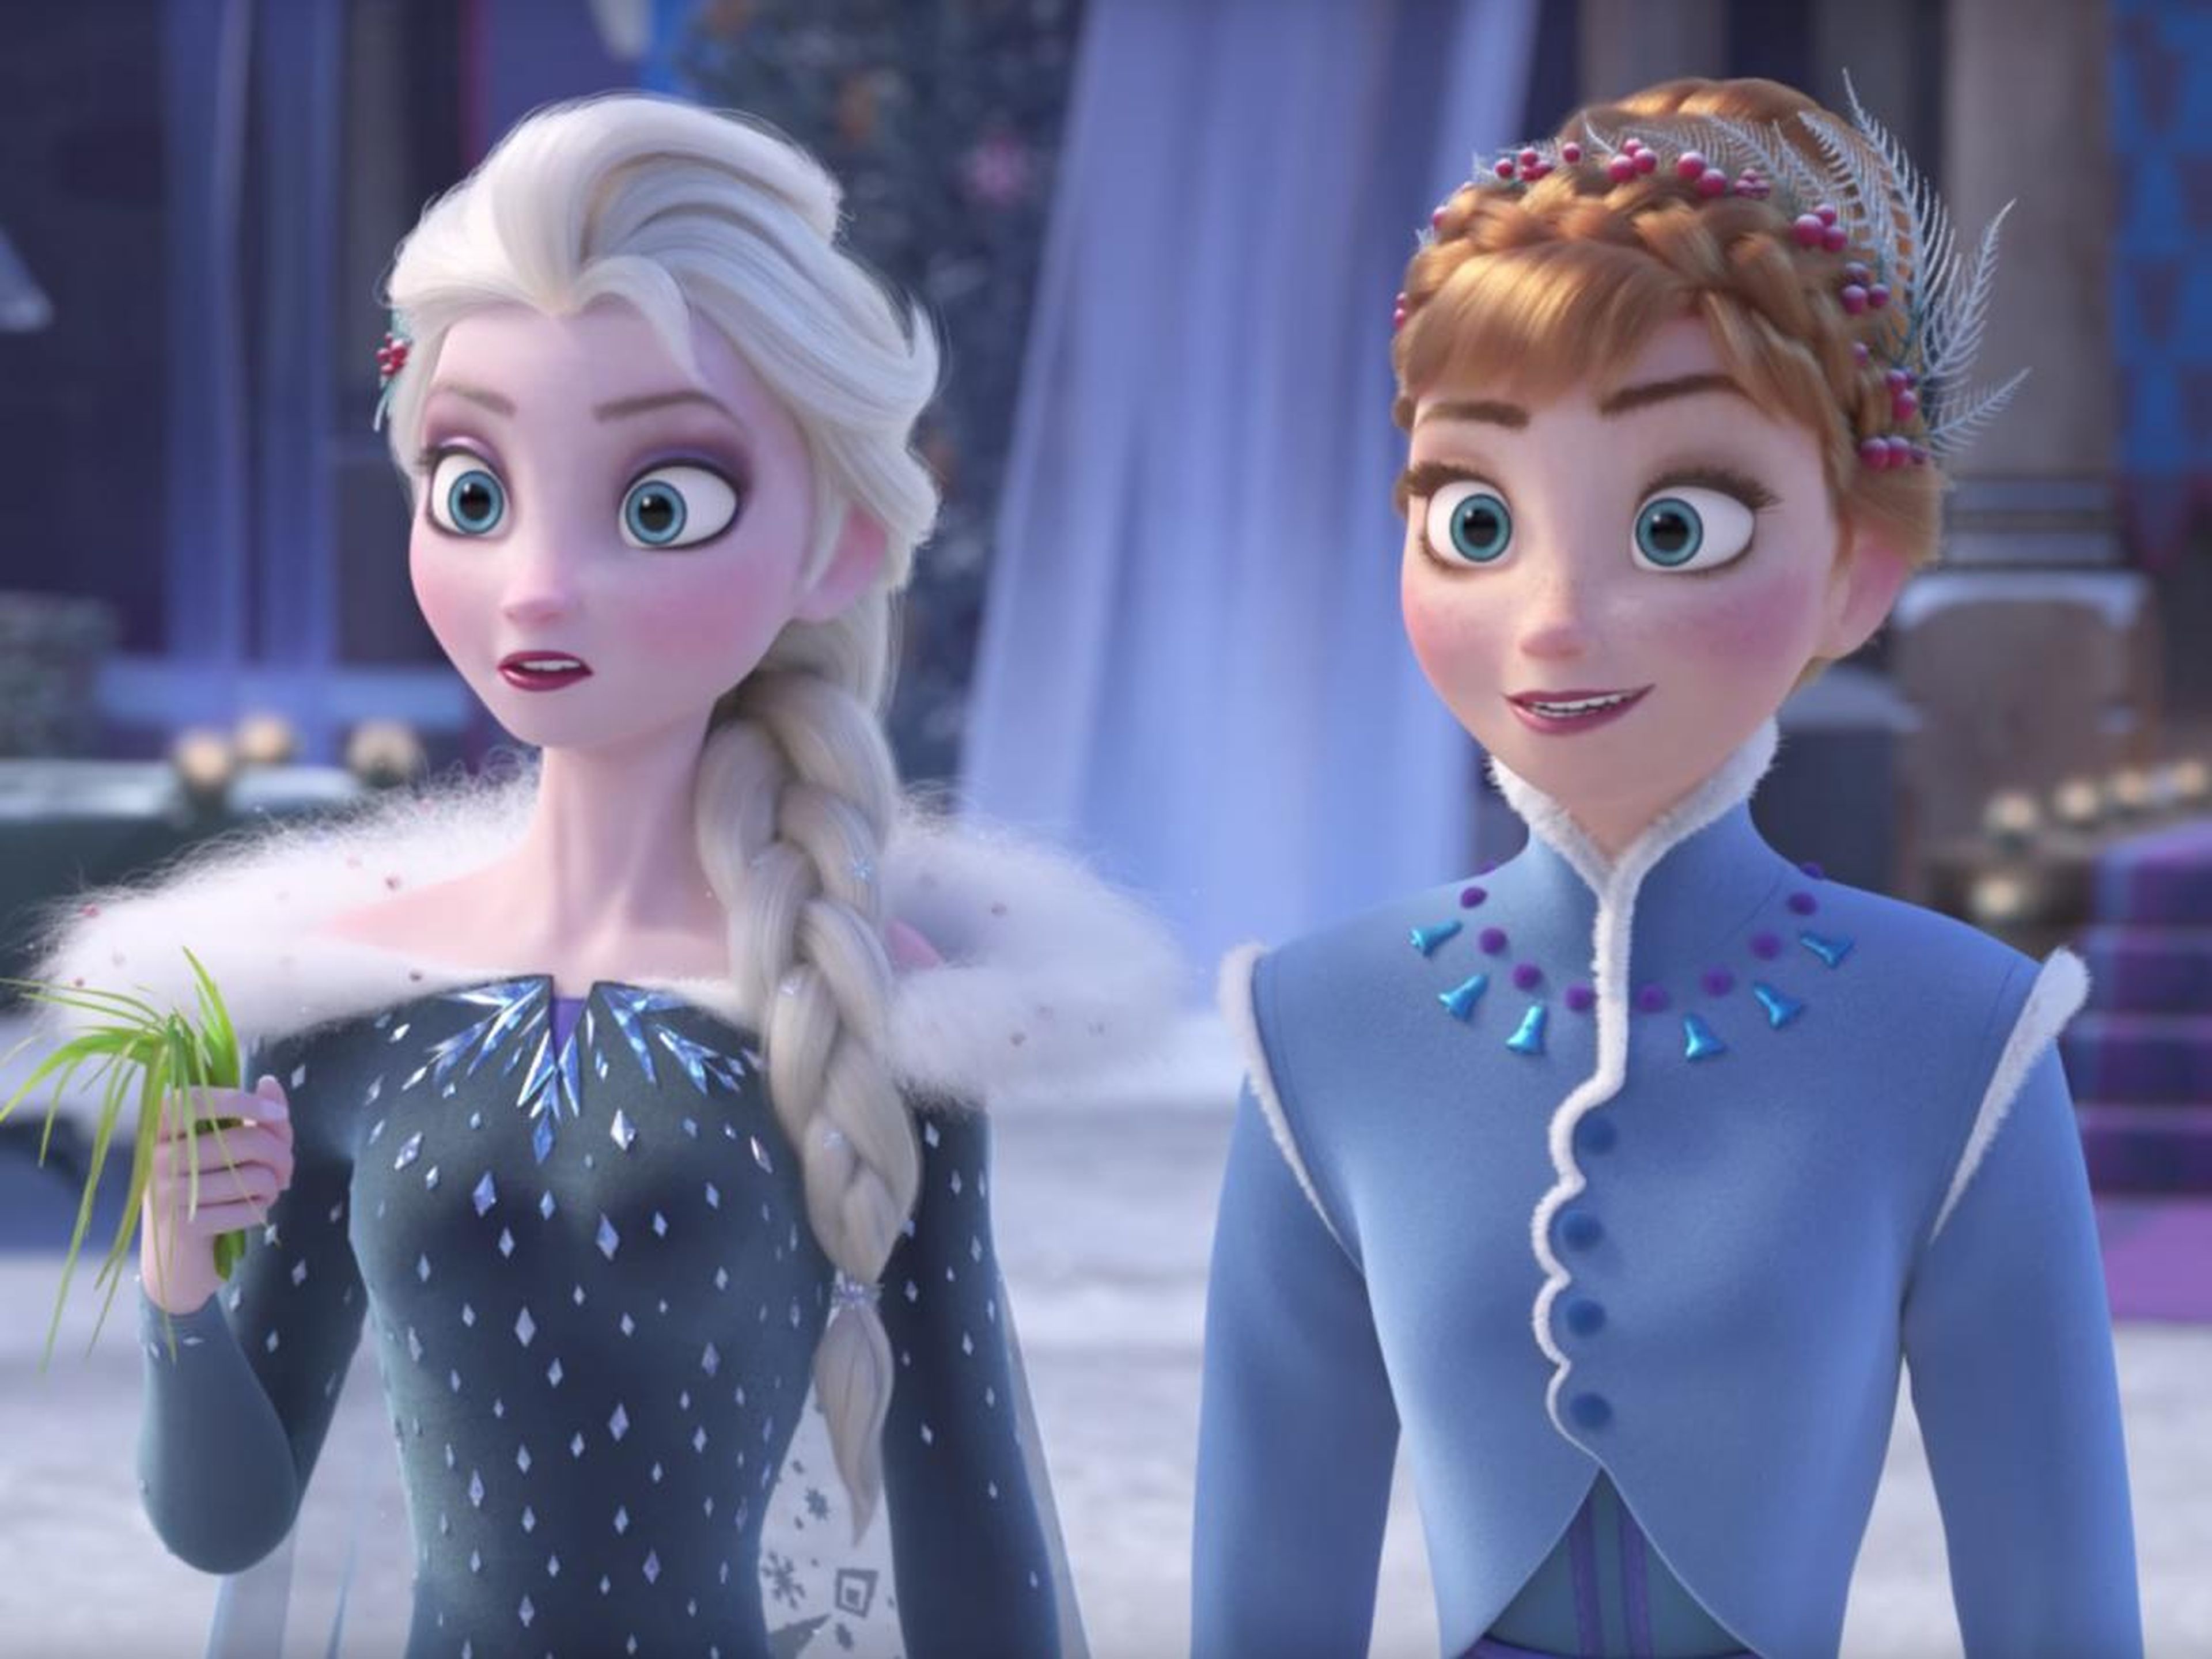 "Frozen" became the highest-grossing animated movie of all time after its 2013 release.